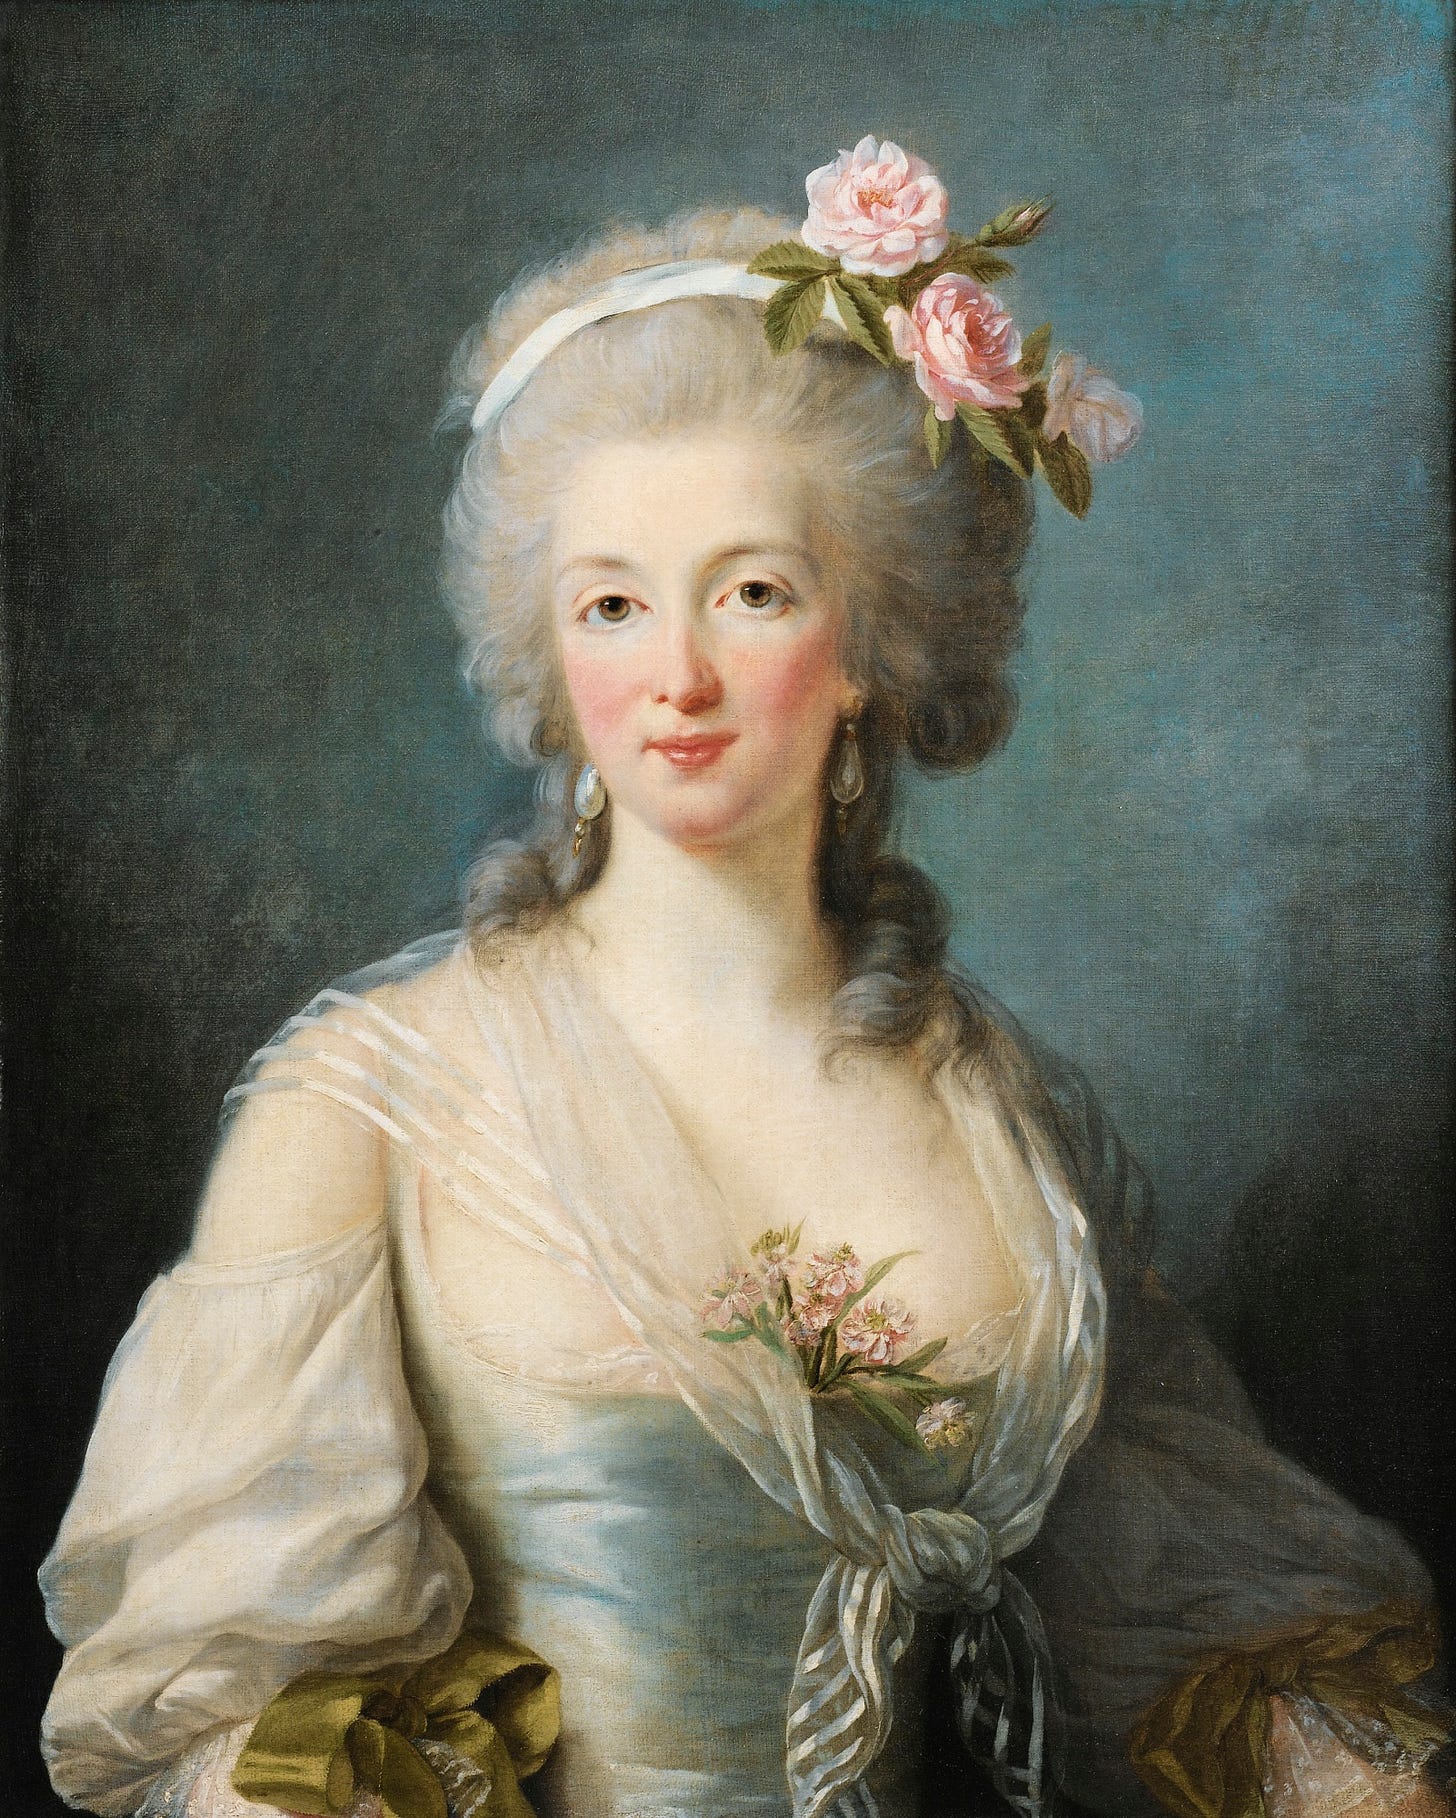 A painting of Comtesse de La Motte, a white woman with flowers in her hair.